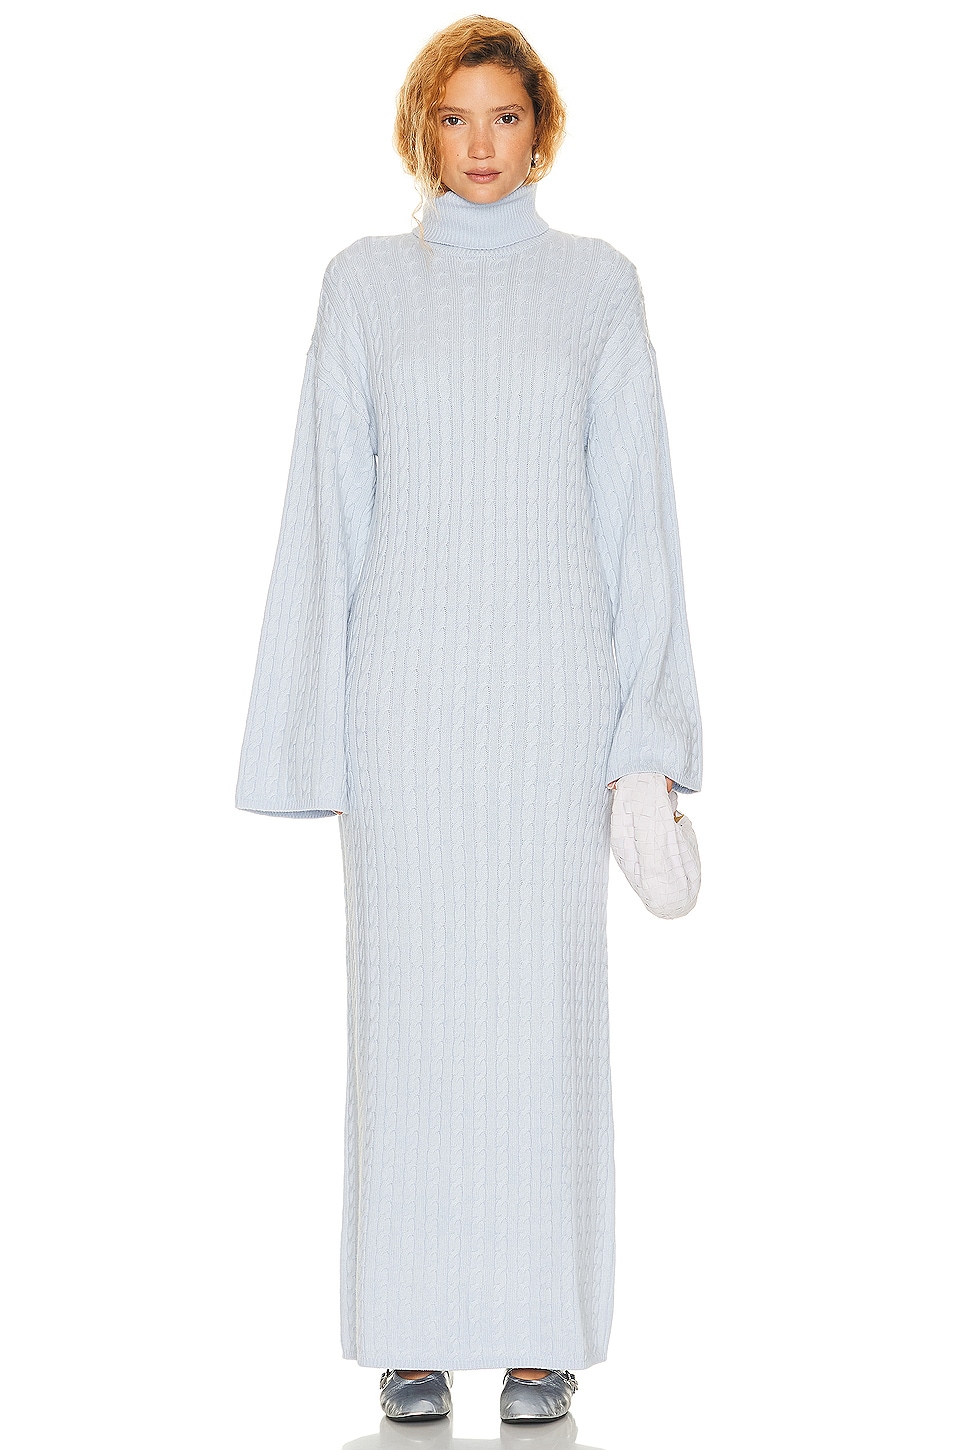 Image 1 of Helsa Shai Cable Knit Dress in Pale Blue